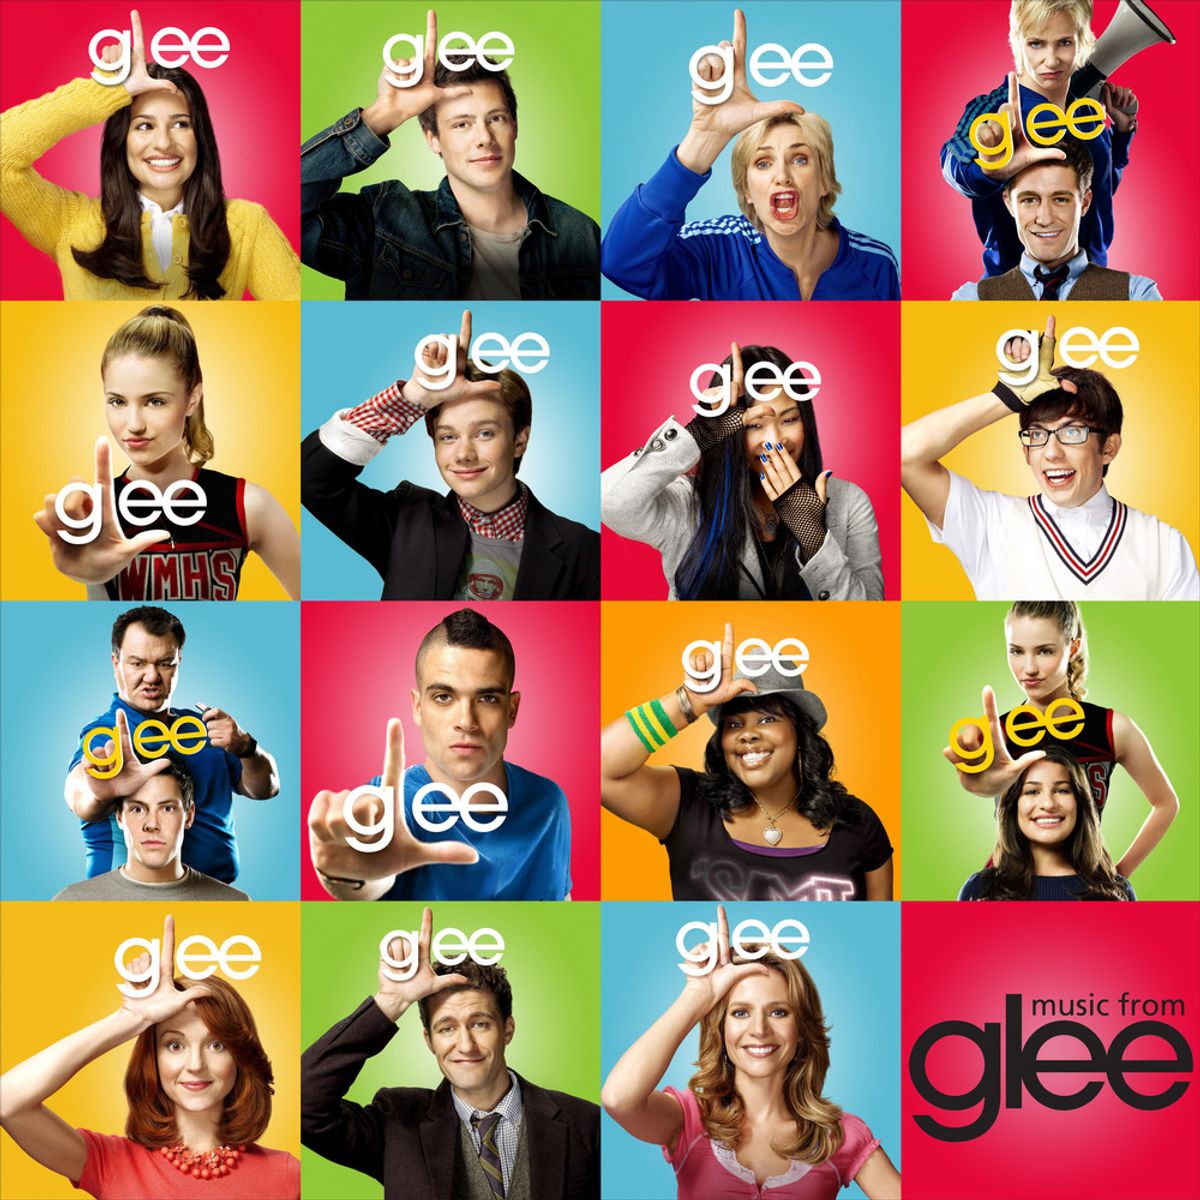 7 of the Best Glee Covers